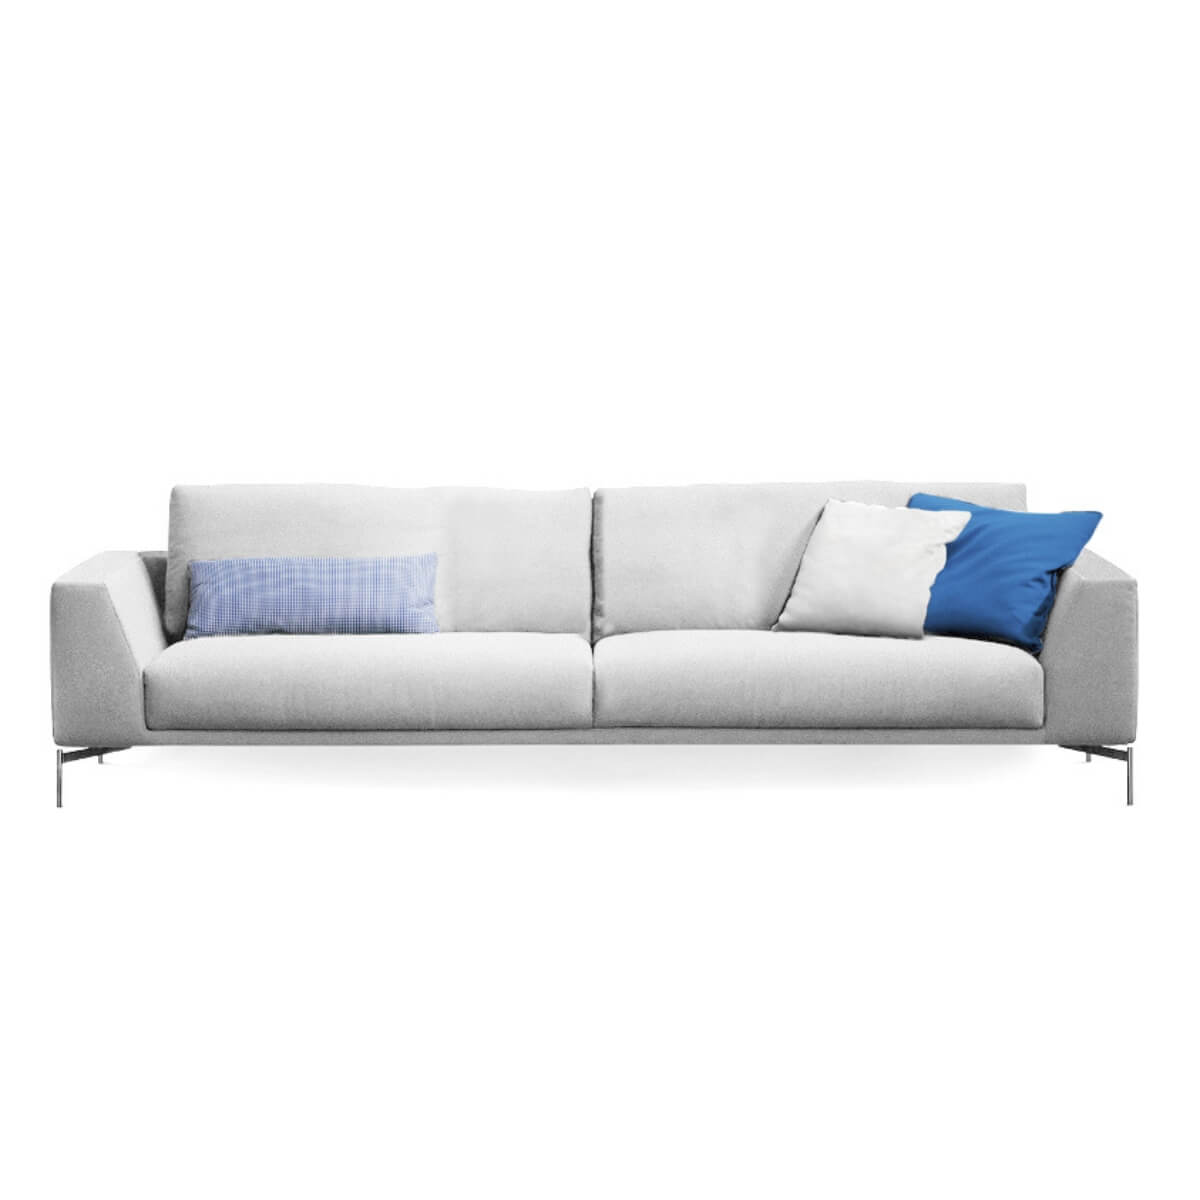 Beyond Boundaries Cotton Linen Sofa: A Canvas of Comfort and Style